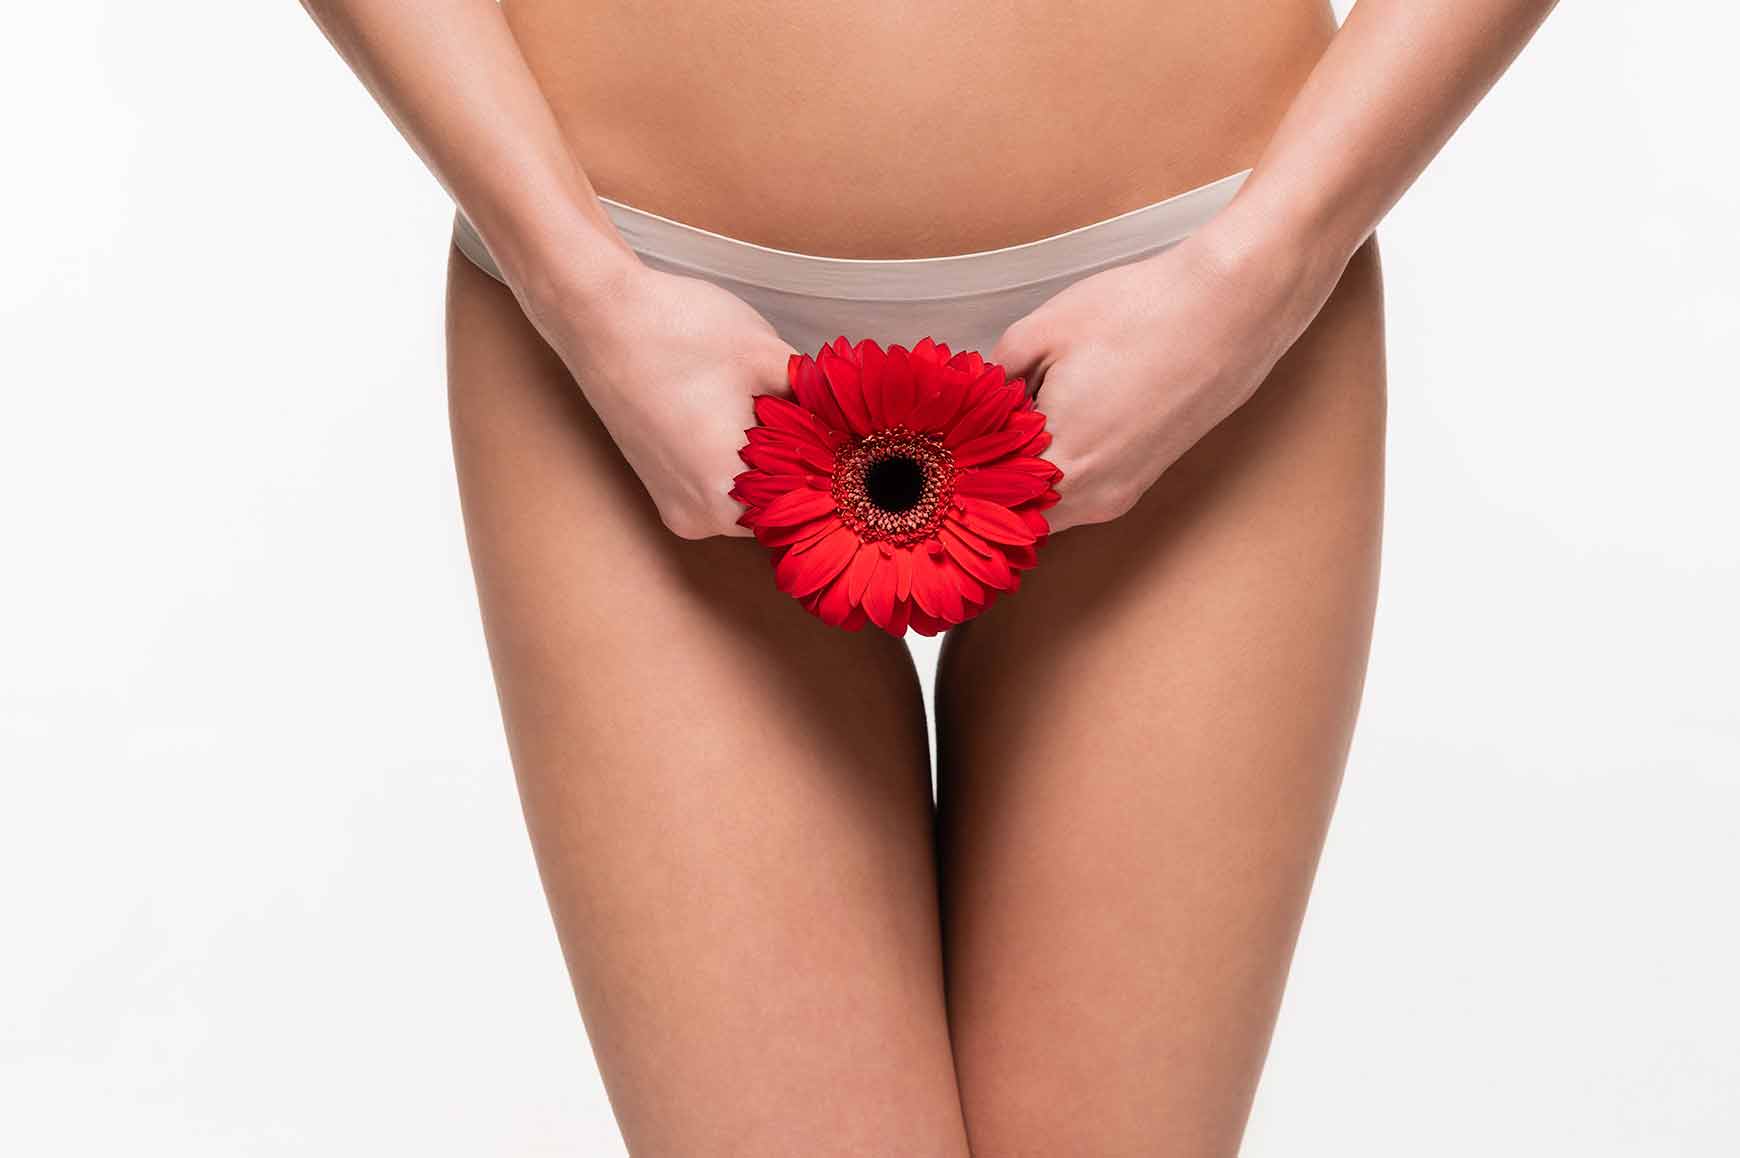 Labiaplasty helps to reshape the labia minor and will enhance comfort. Dr. Melissa Marks will help you achieve the best cosmetic solution.